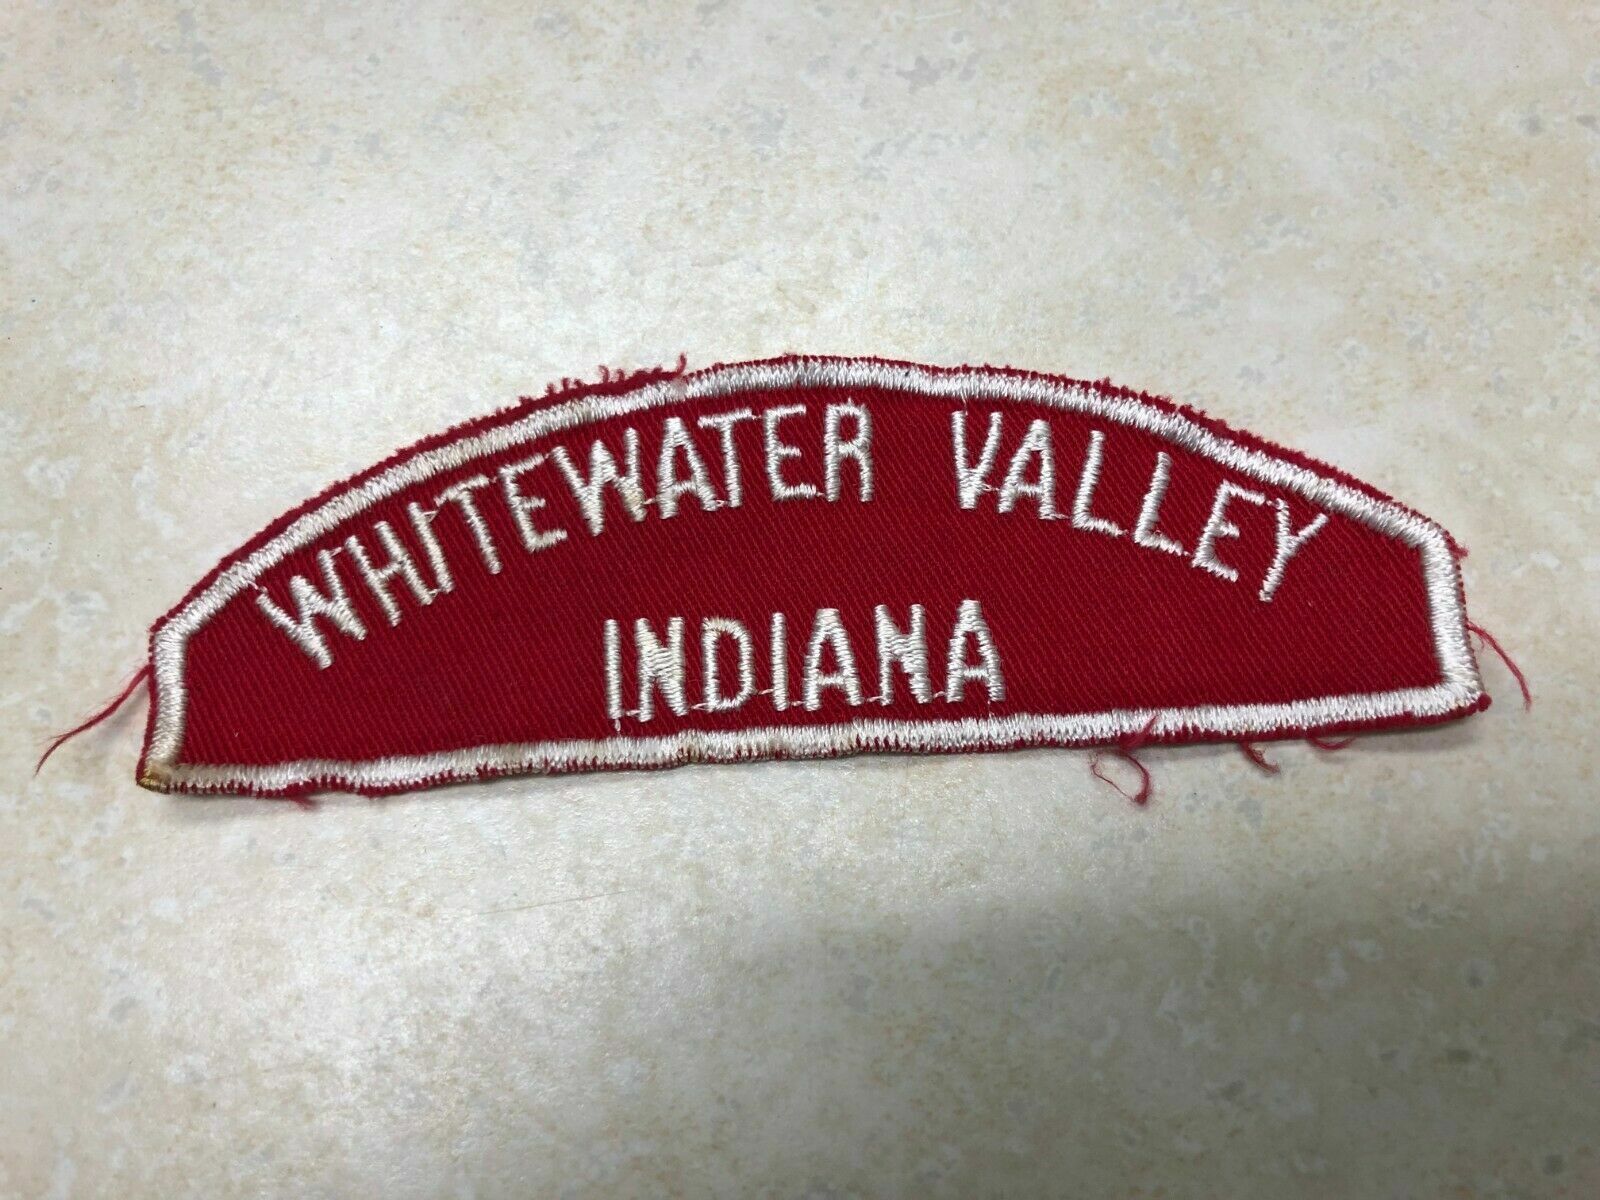 Whitewater Valley Indiana Red & White RWS Council Strip